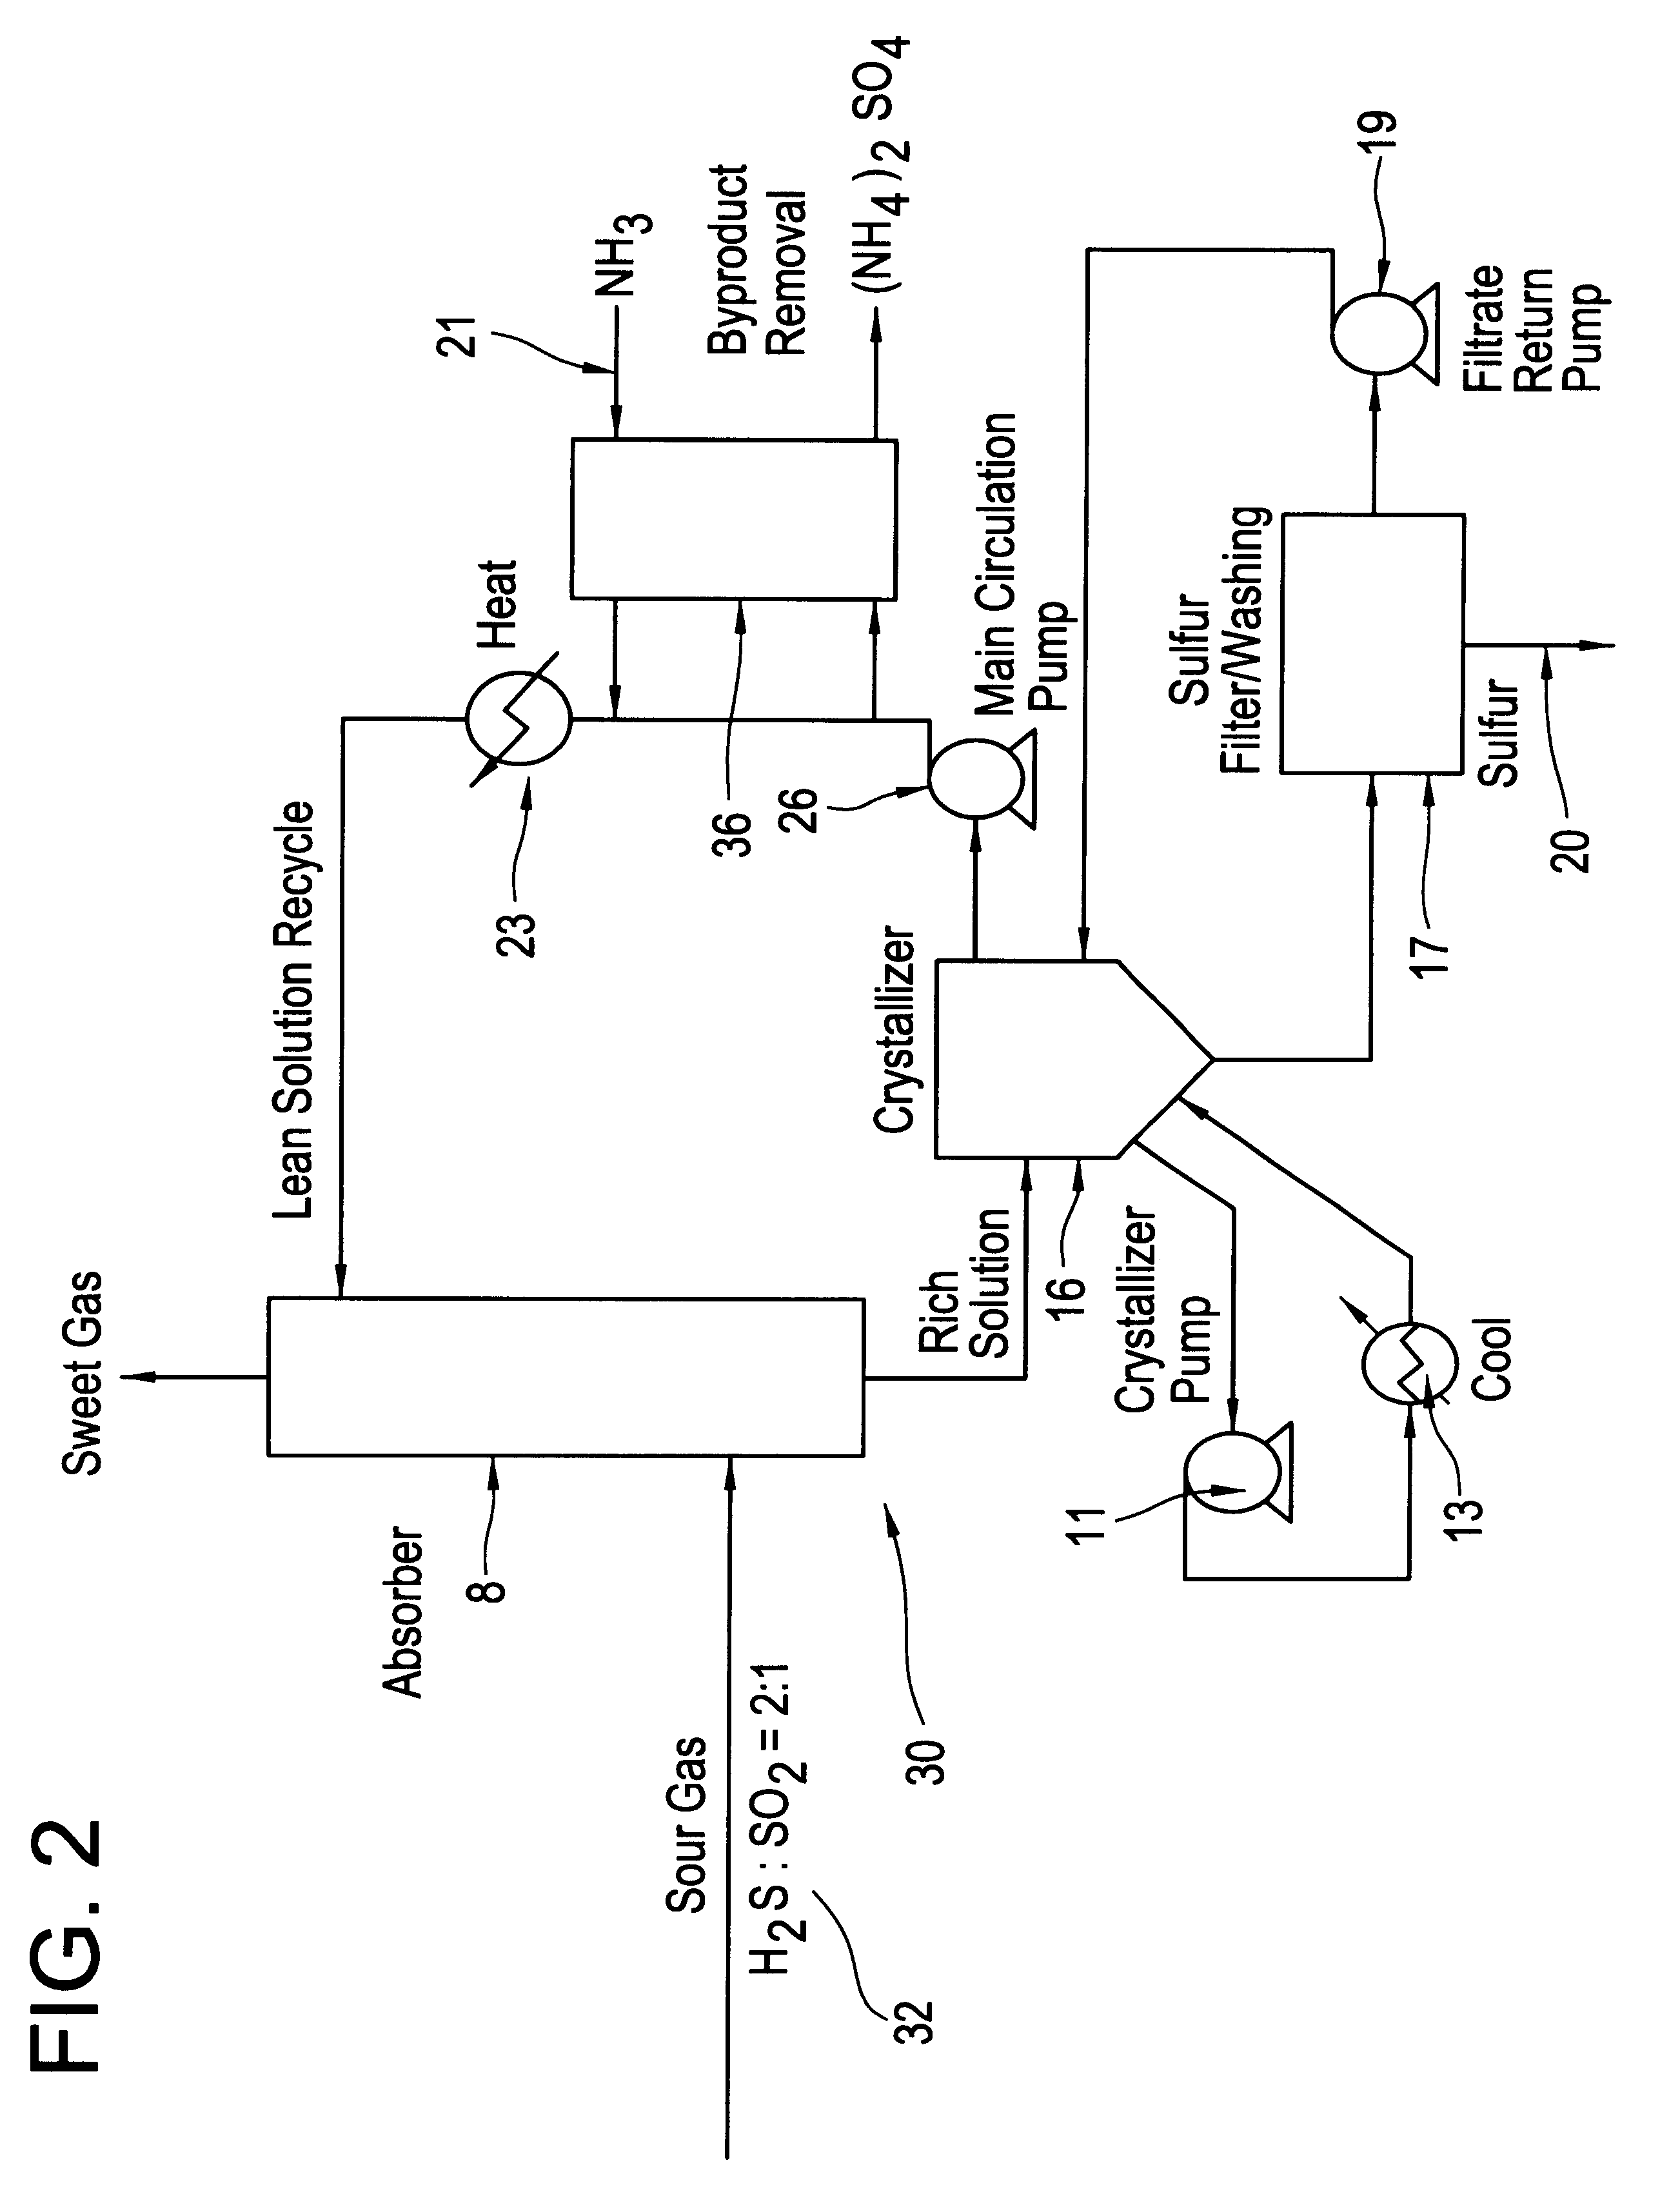 Process for removing hydrogen sulfide from gas streams which include or are supplemented with sulfur dioxide